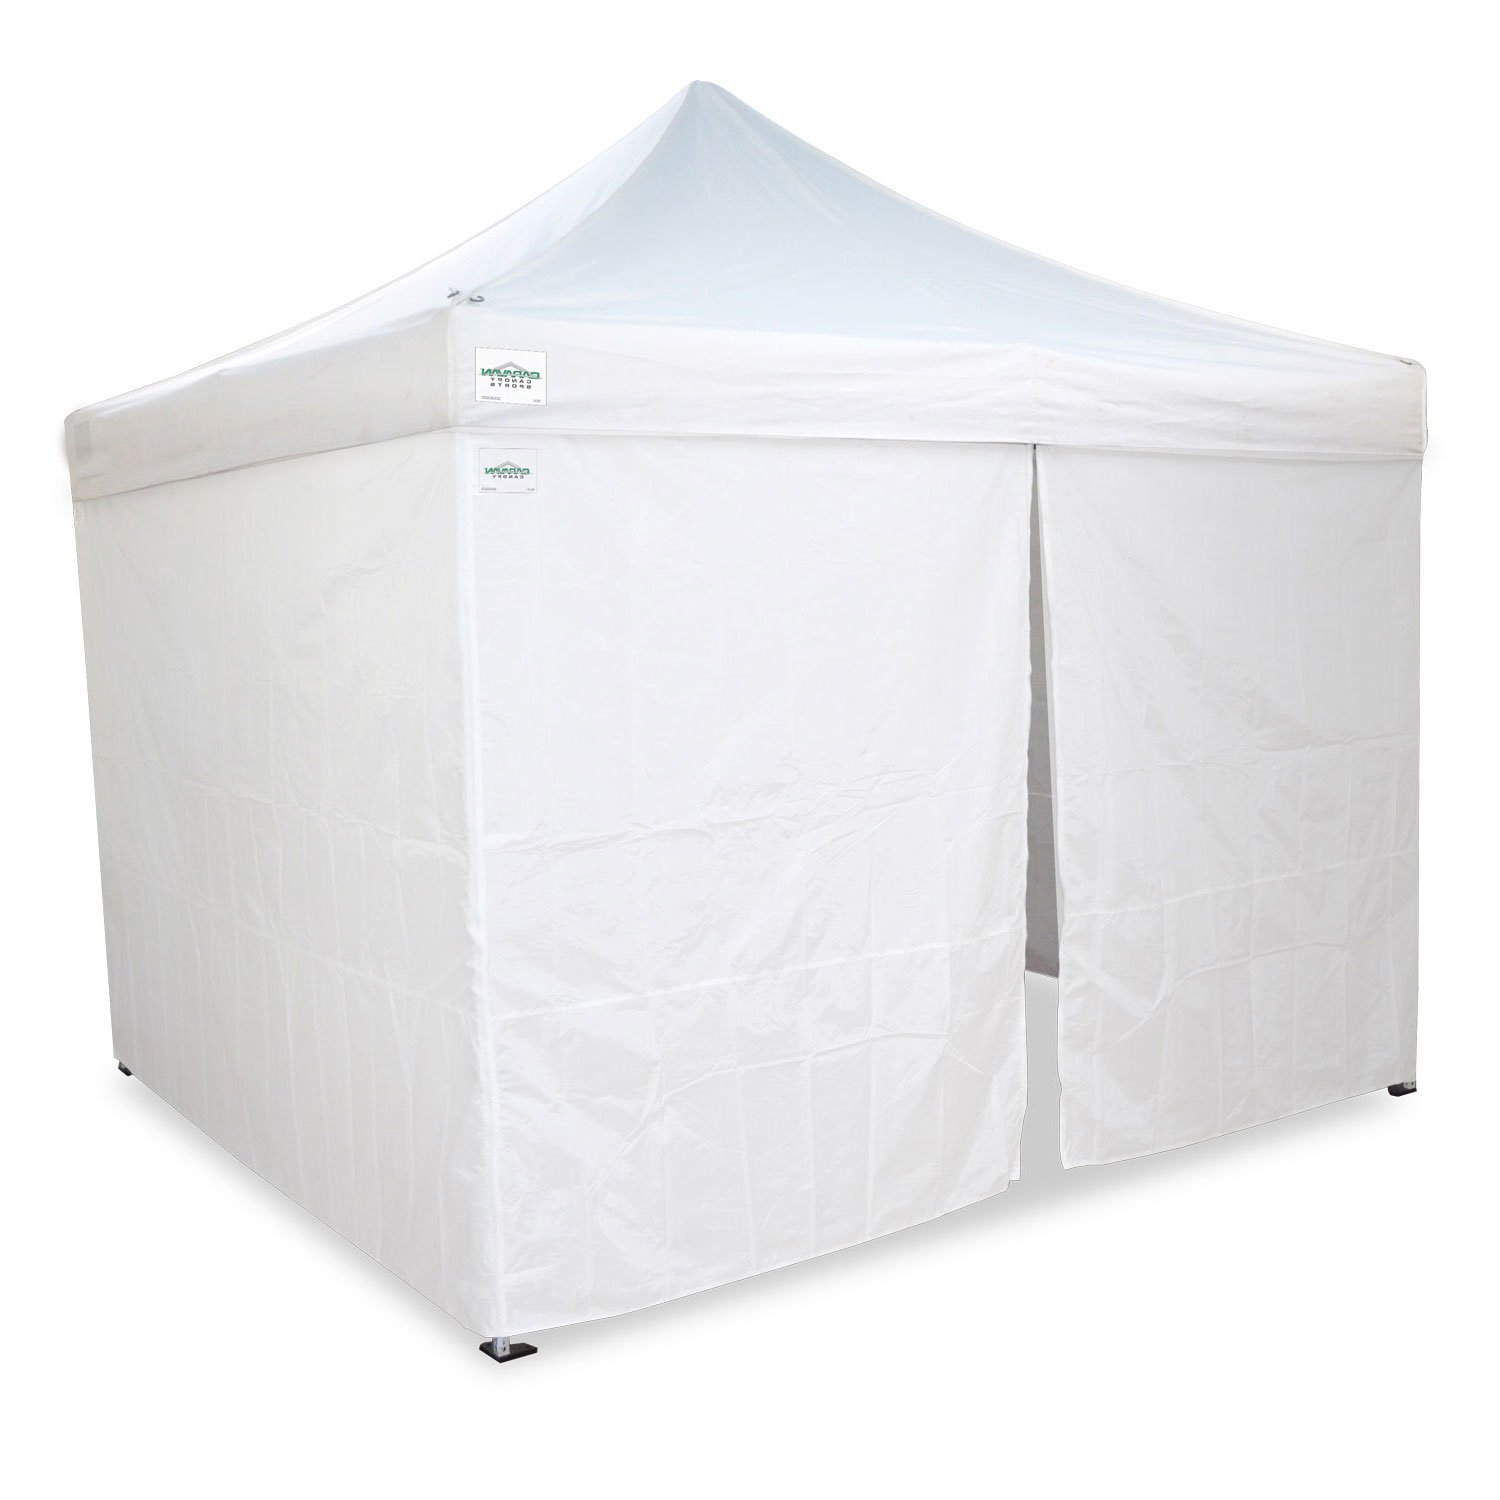 Caravan Canopy CVAN11007912014 4 Sidewall Kit Only, for Outdoor Tent, White - image 3 of 5